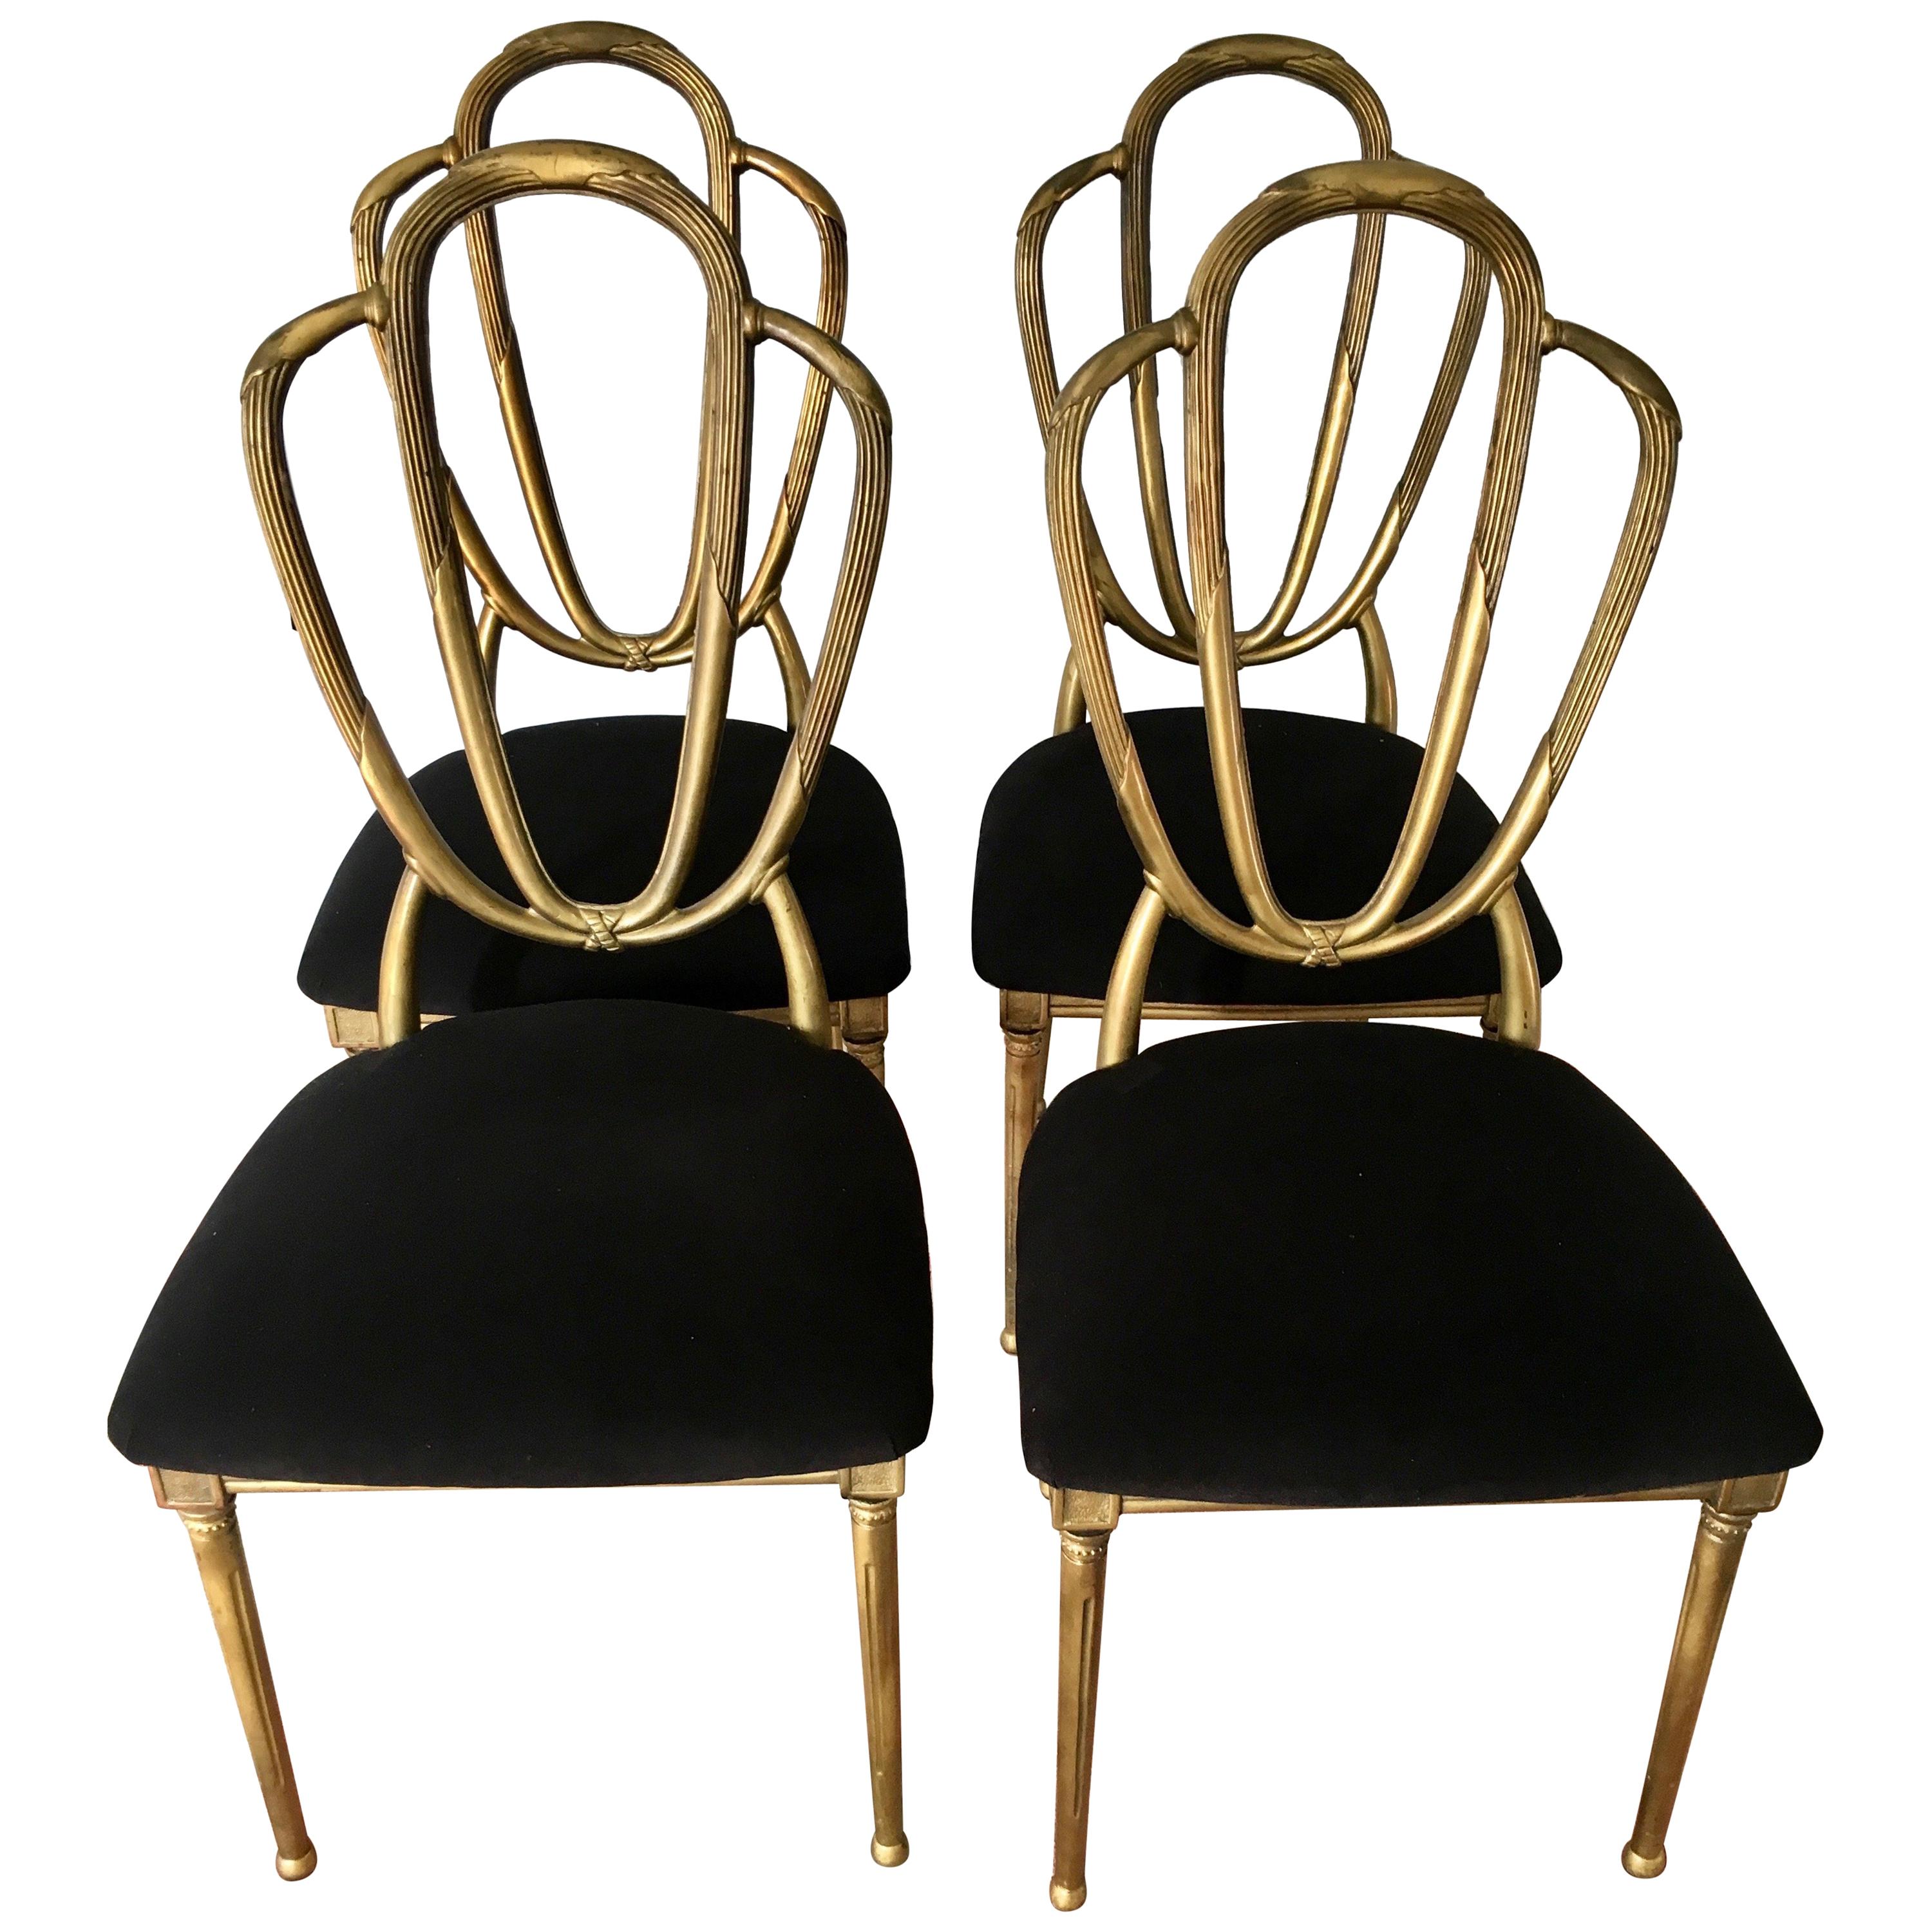 Four Midcentury Gold Dining Chairs